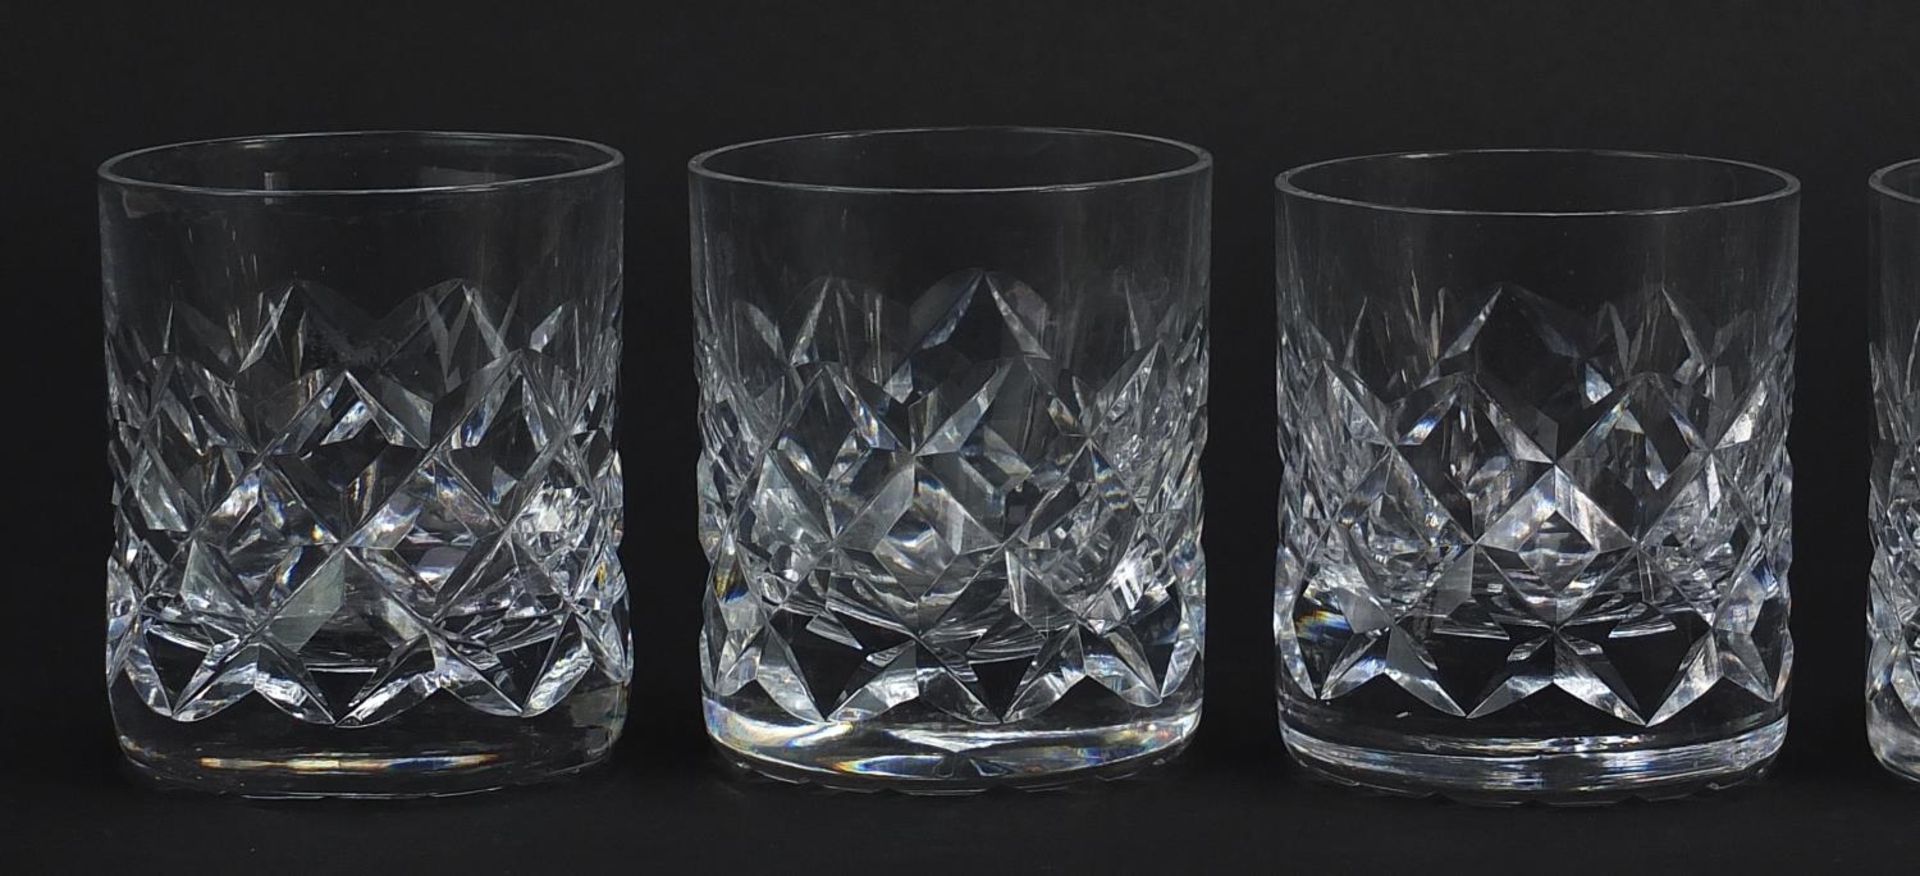 Six lead crystal whiskey tumblers, 8cm high - Image 2 of 6